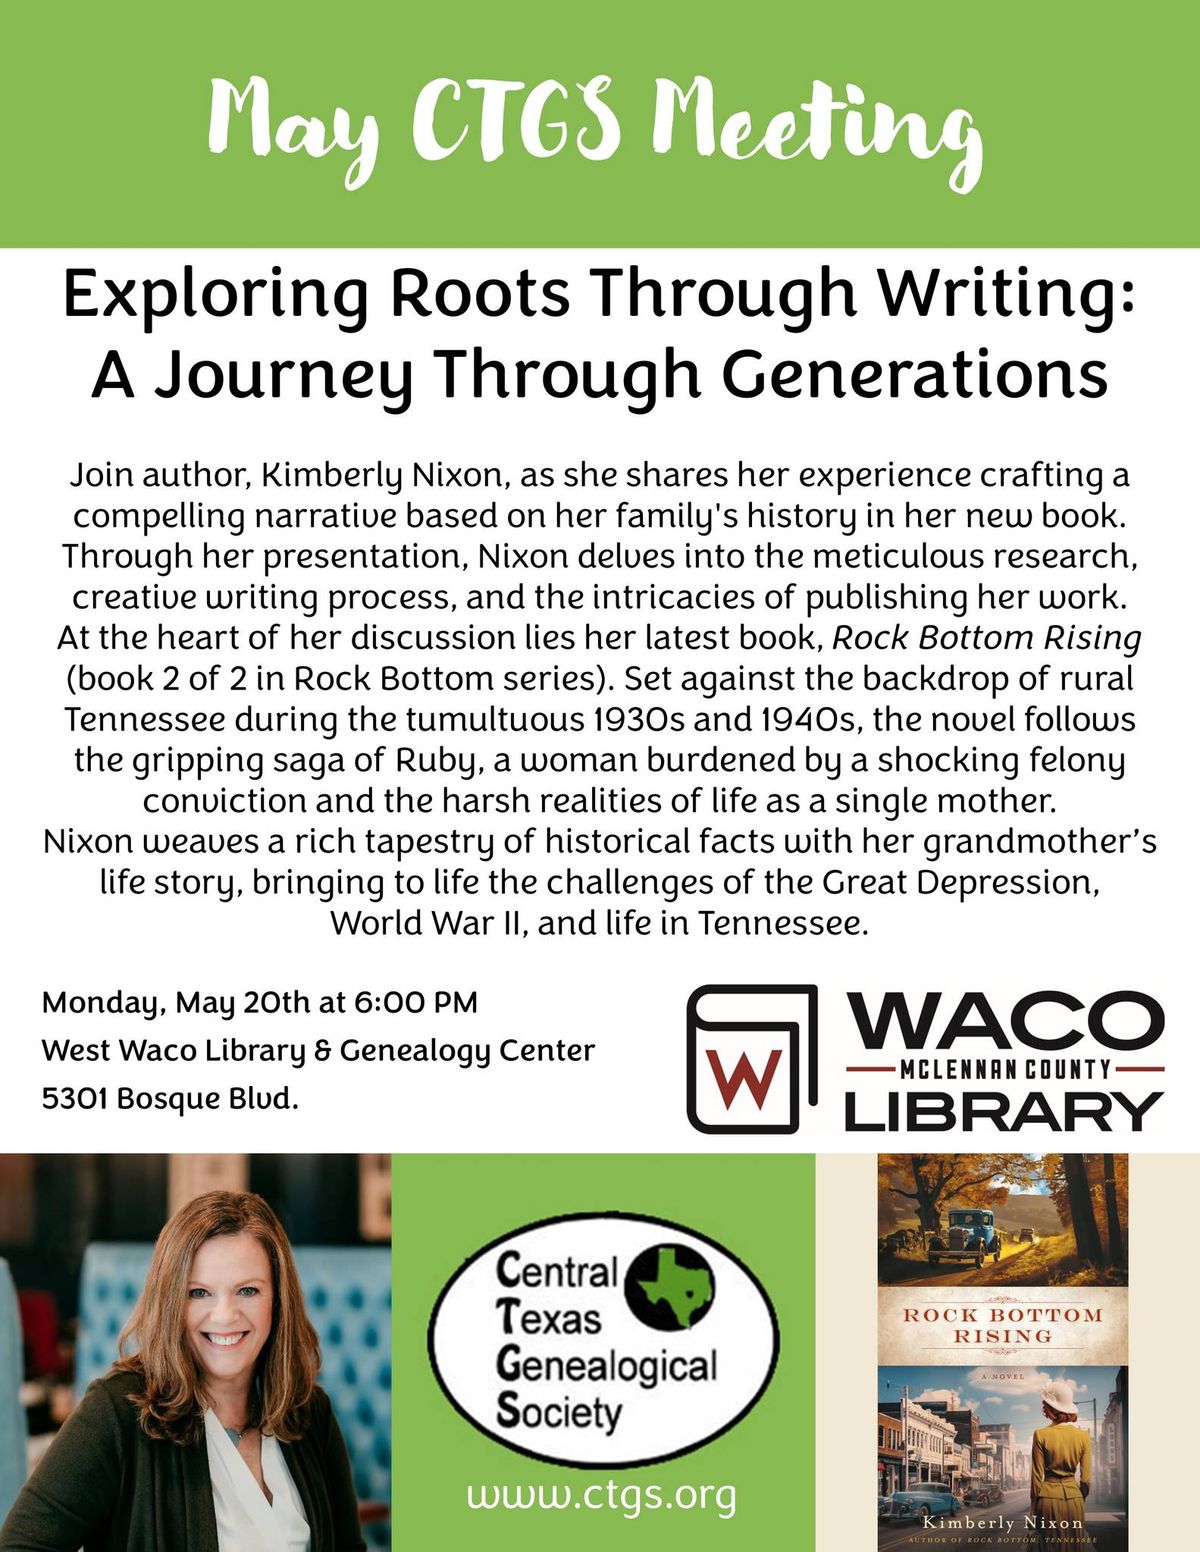 CTGS Presents: "Exploring Roots Through Writing: A Journey Through Generations"